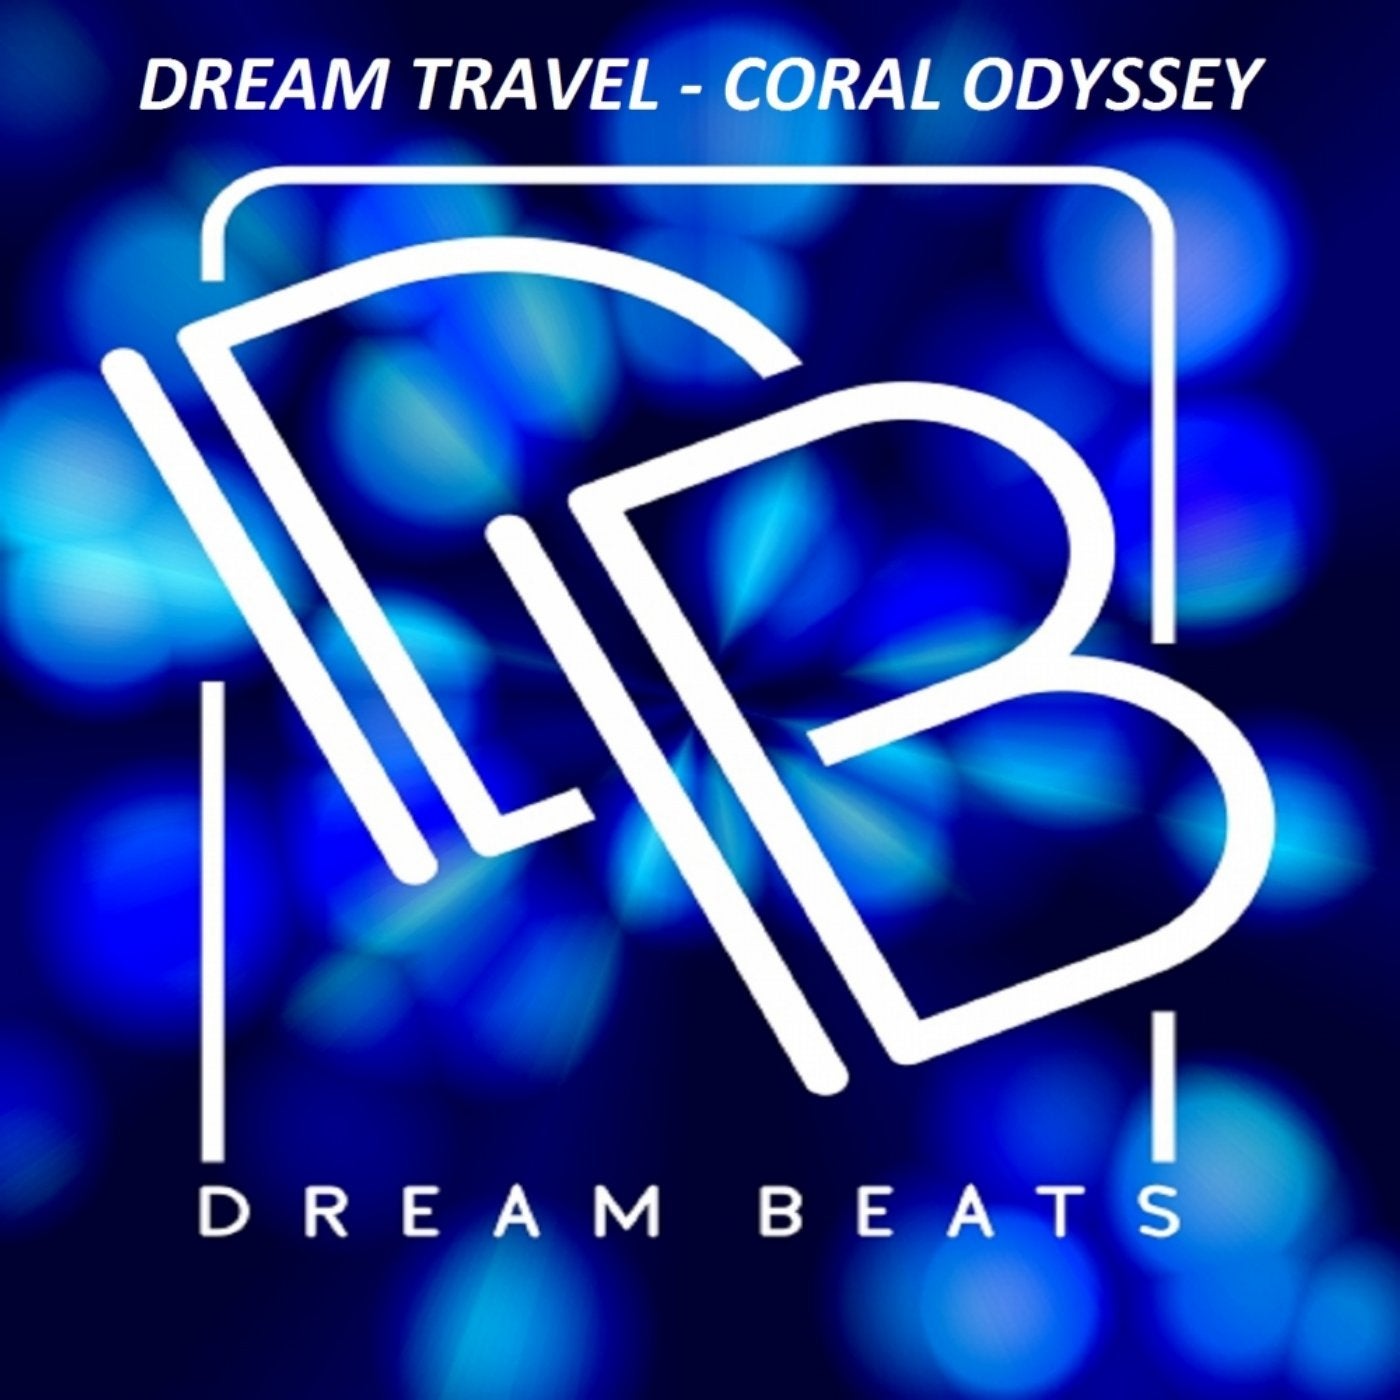 Coral Odyssey